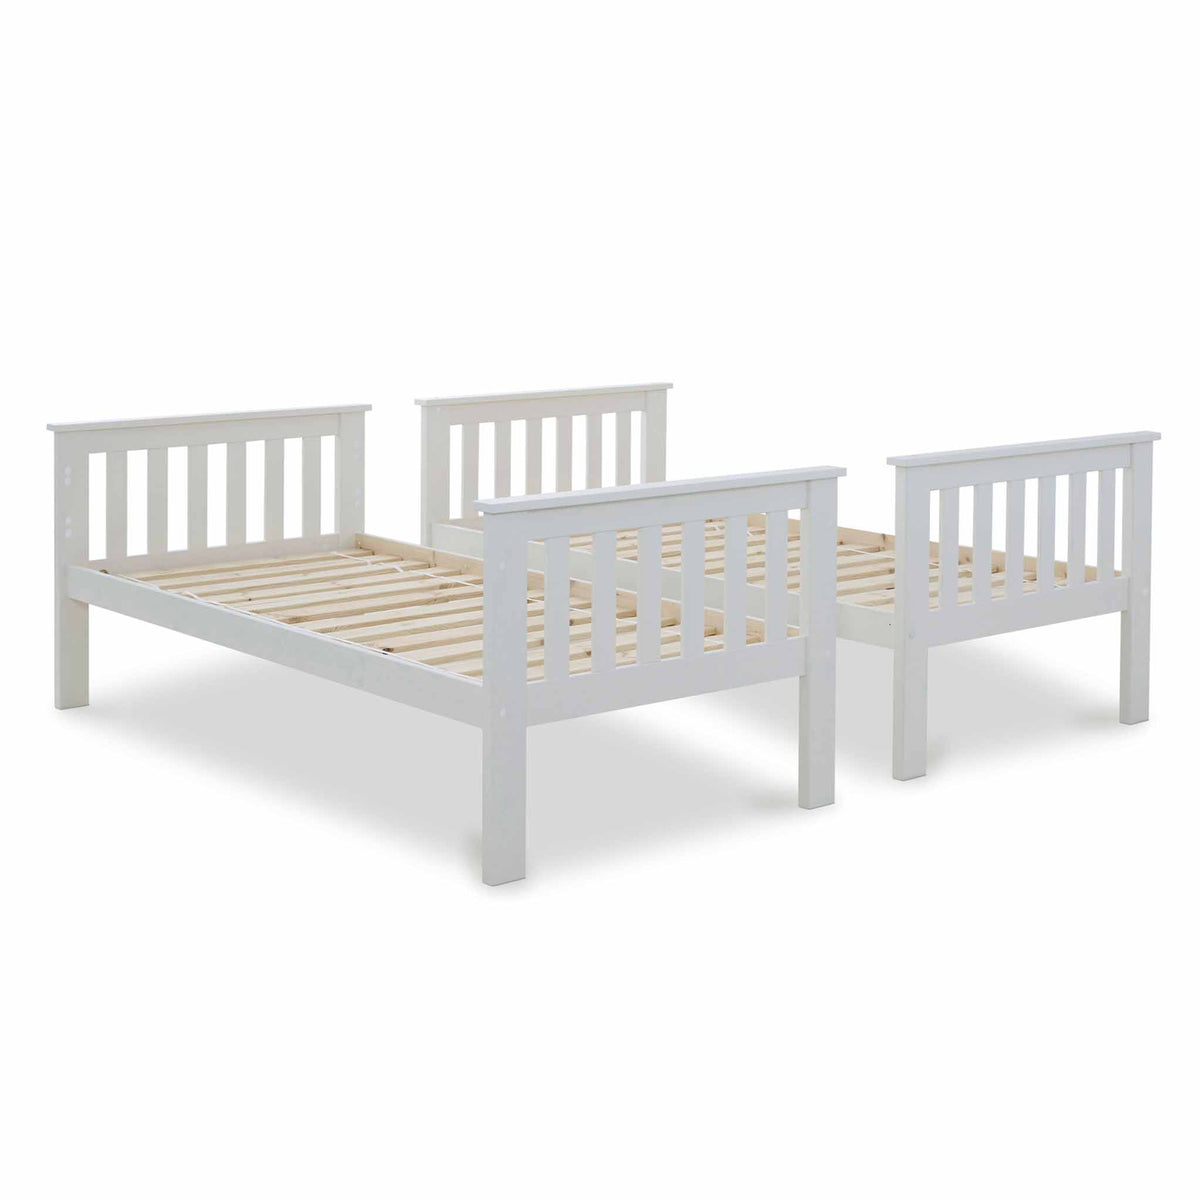 Pair of Separated 3 ft beds from the Carlson White Detachable Single Bunk Beds